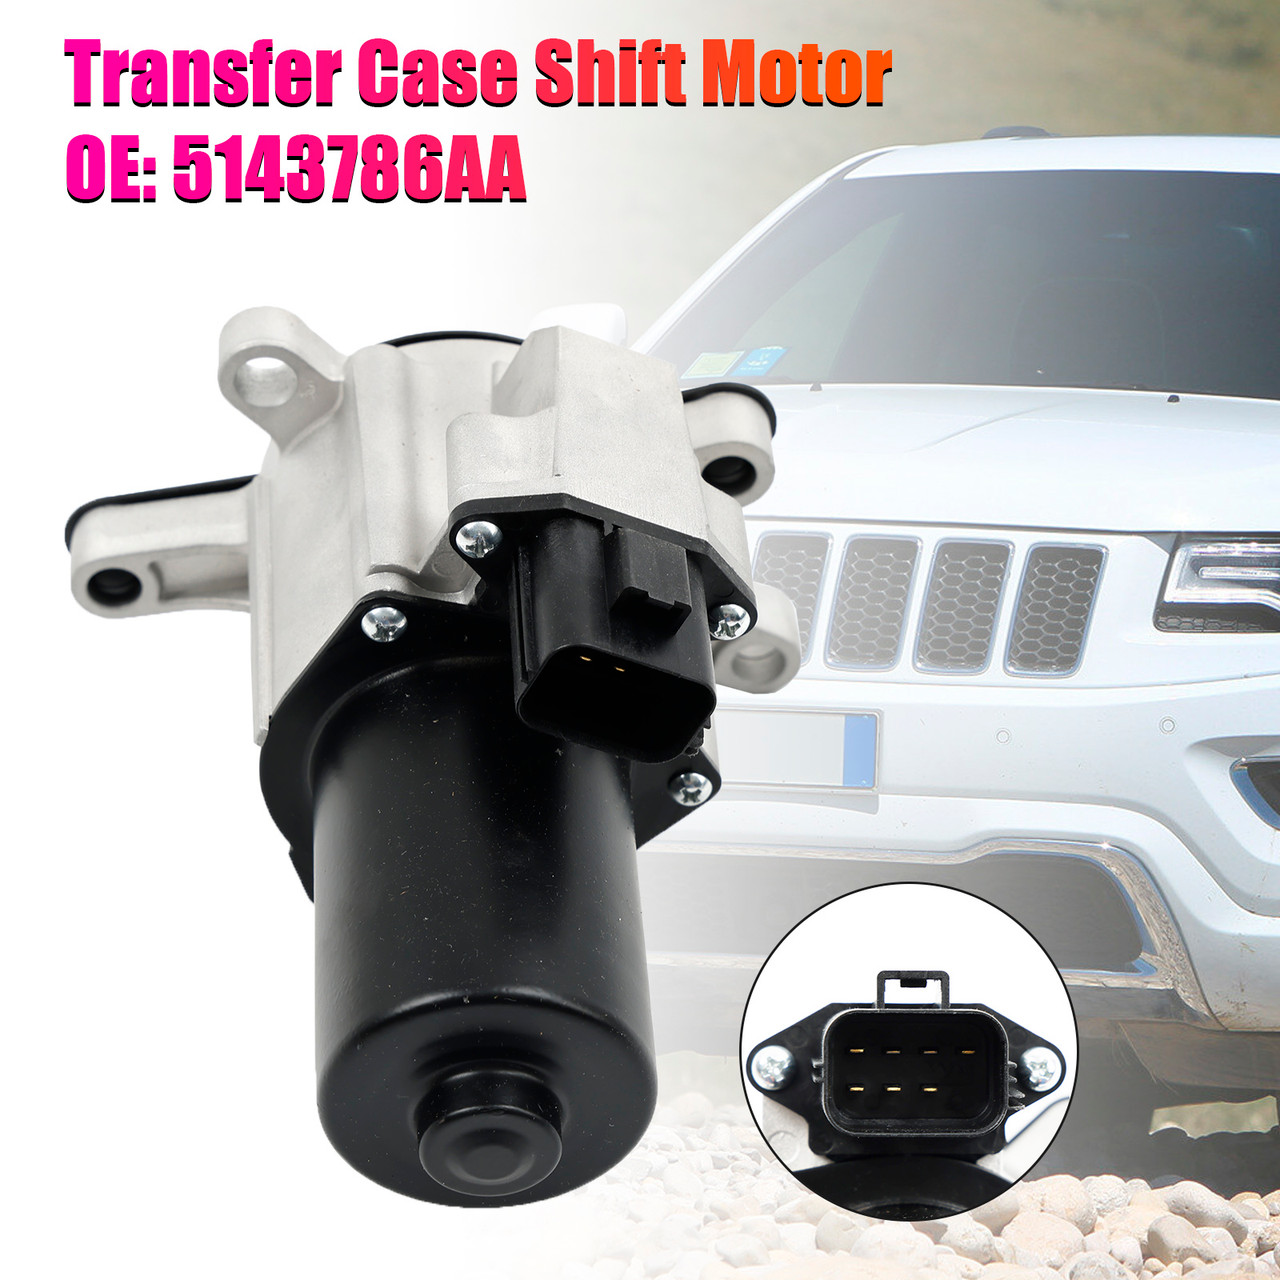 Transfer Case Shift Motor for Jeep Grand w/NV146 NV245 2005-2010 5143786AA